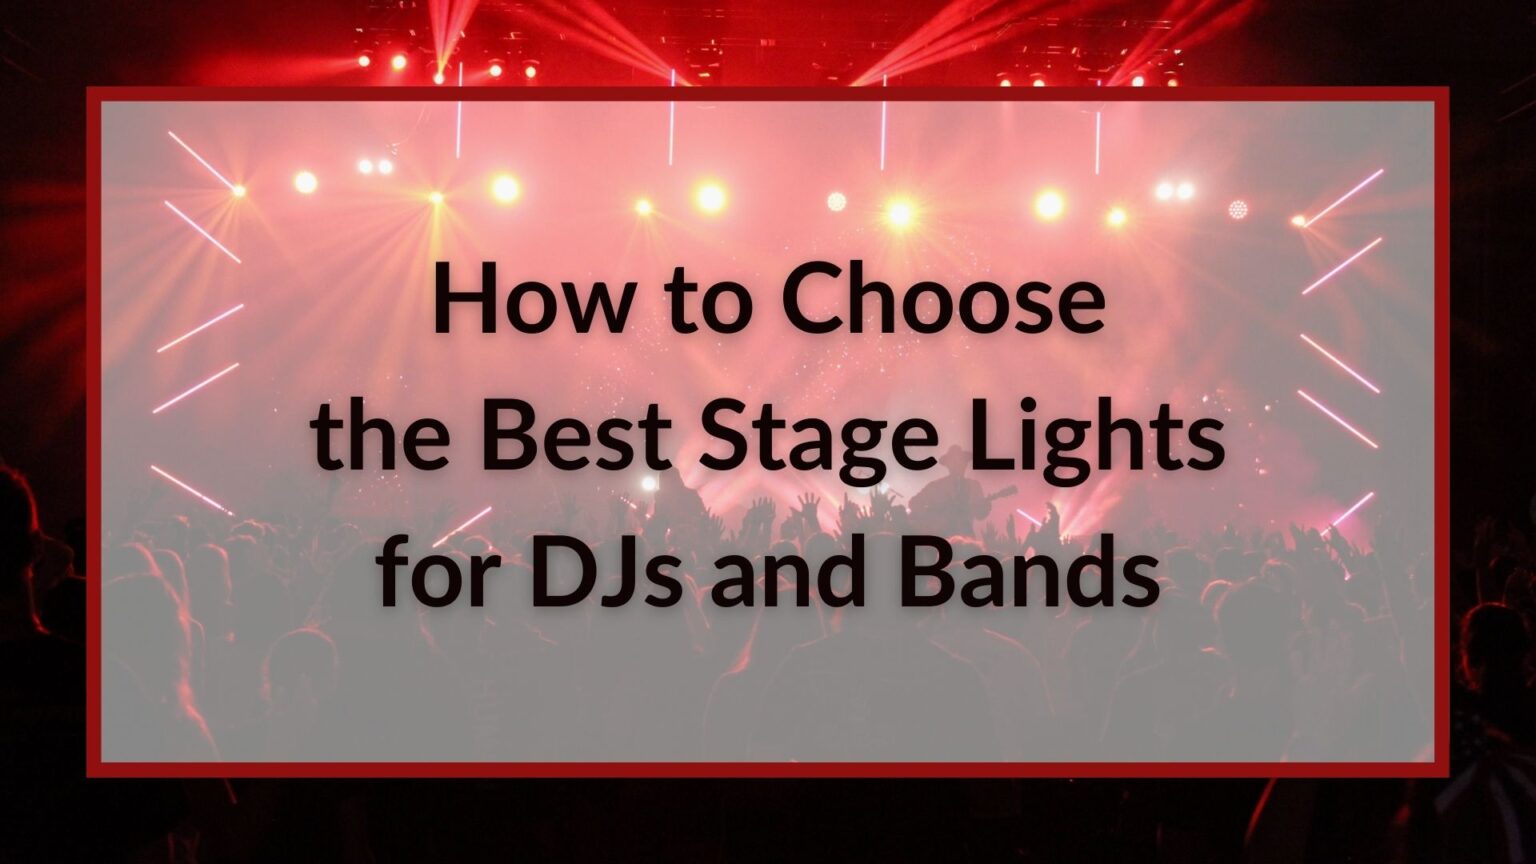 How to Choose the Best Stage Lights for DJs and Bands